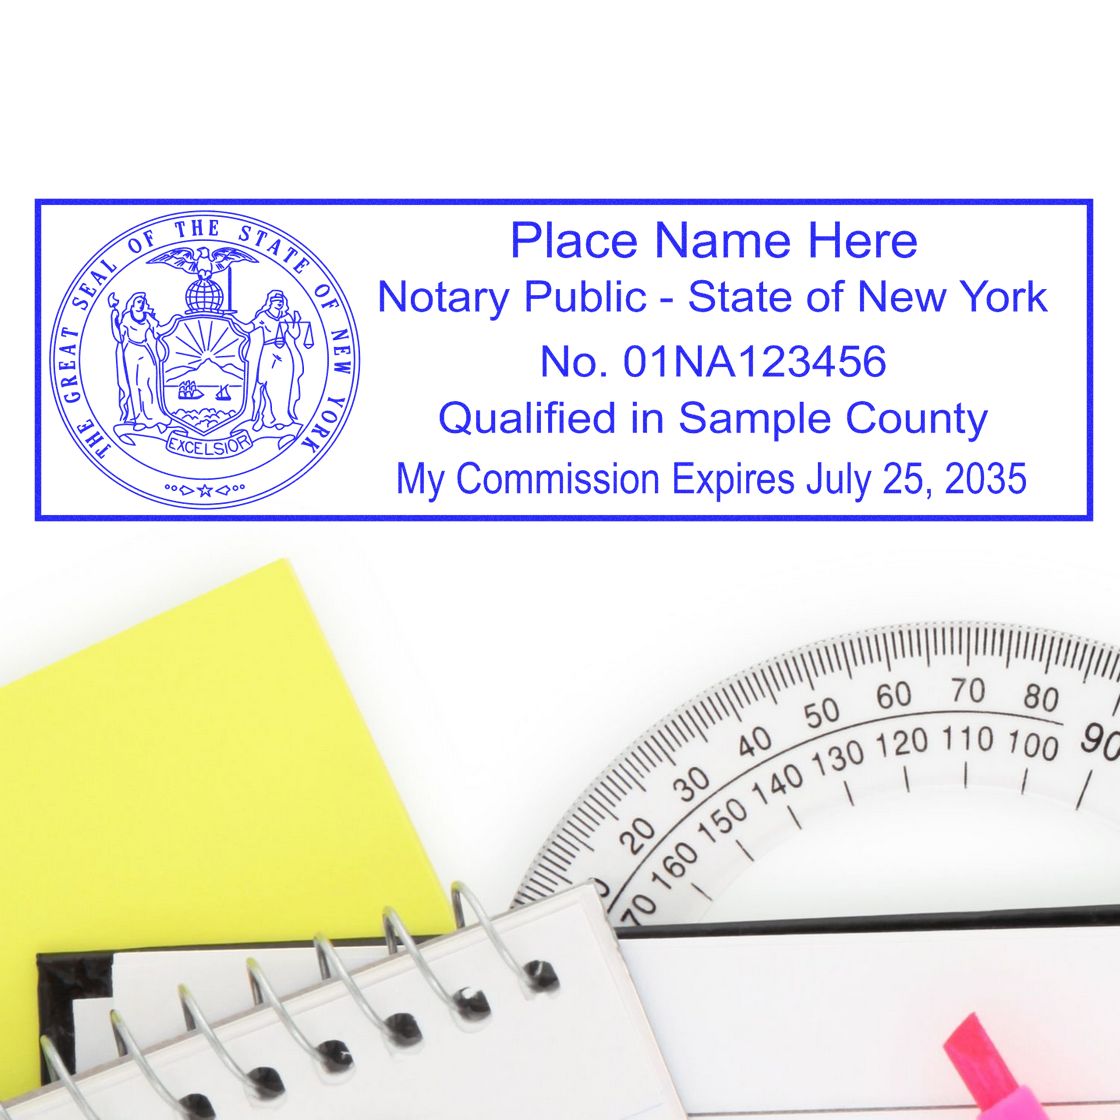 An alternative view of the Heavy-Duty New York Rectangular Notary Stamp stamped on a sheet of paper showing the image in use